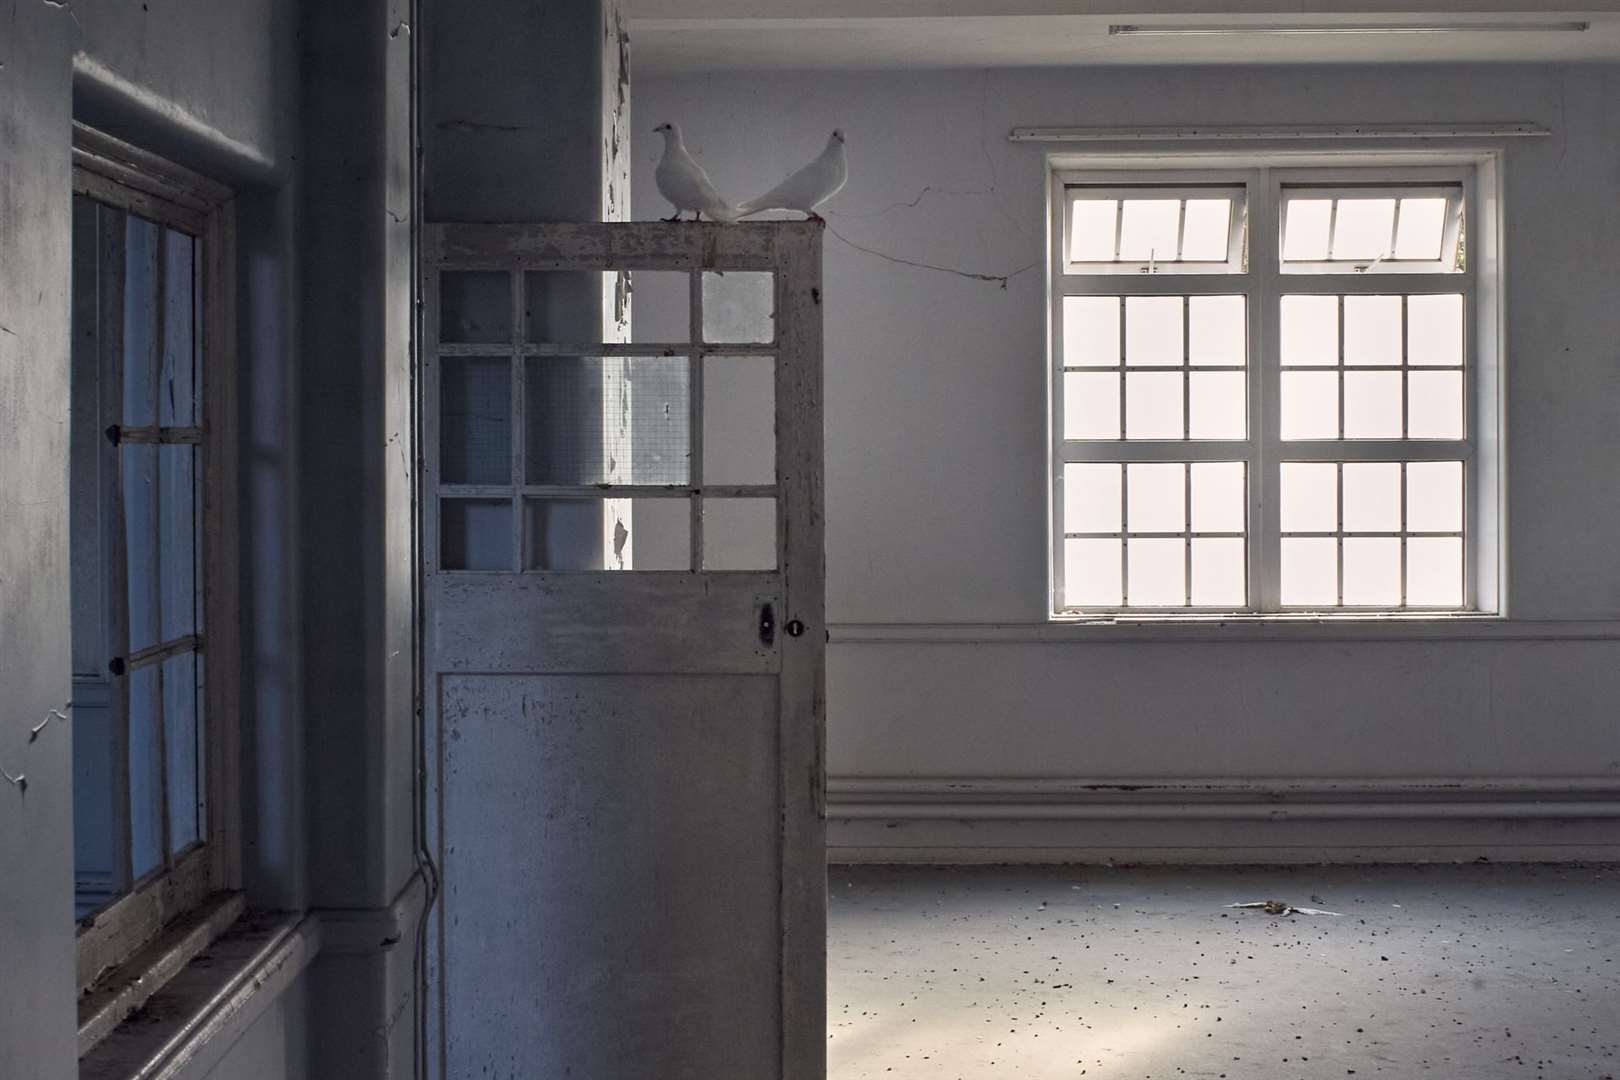 Two doves find a home in the old manor house in 2006. Images: Jamie McGregor Smith